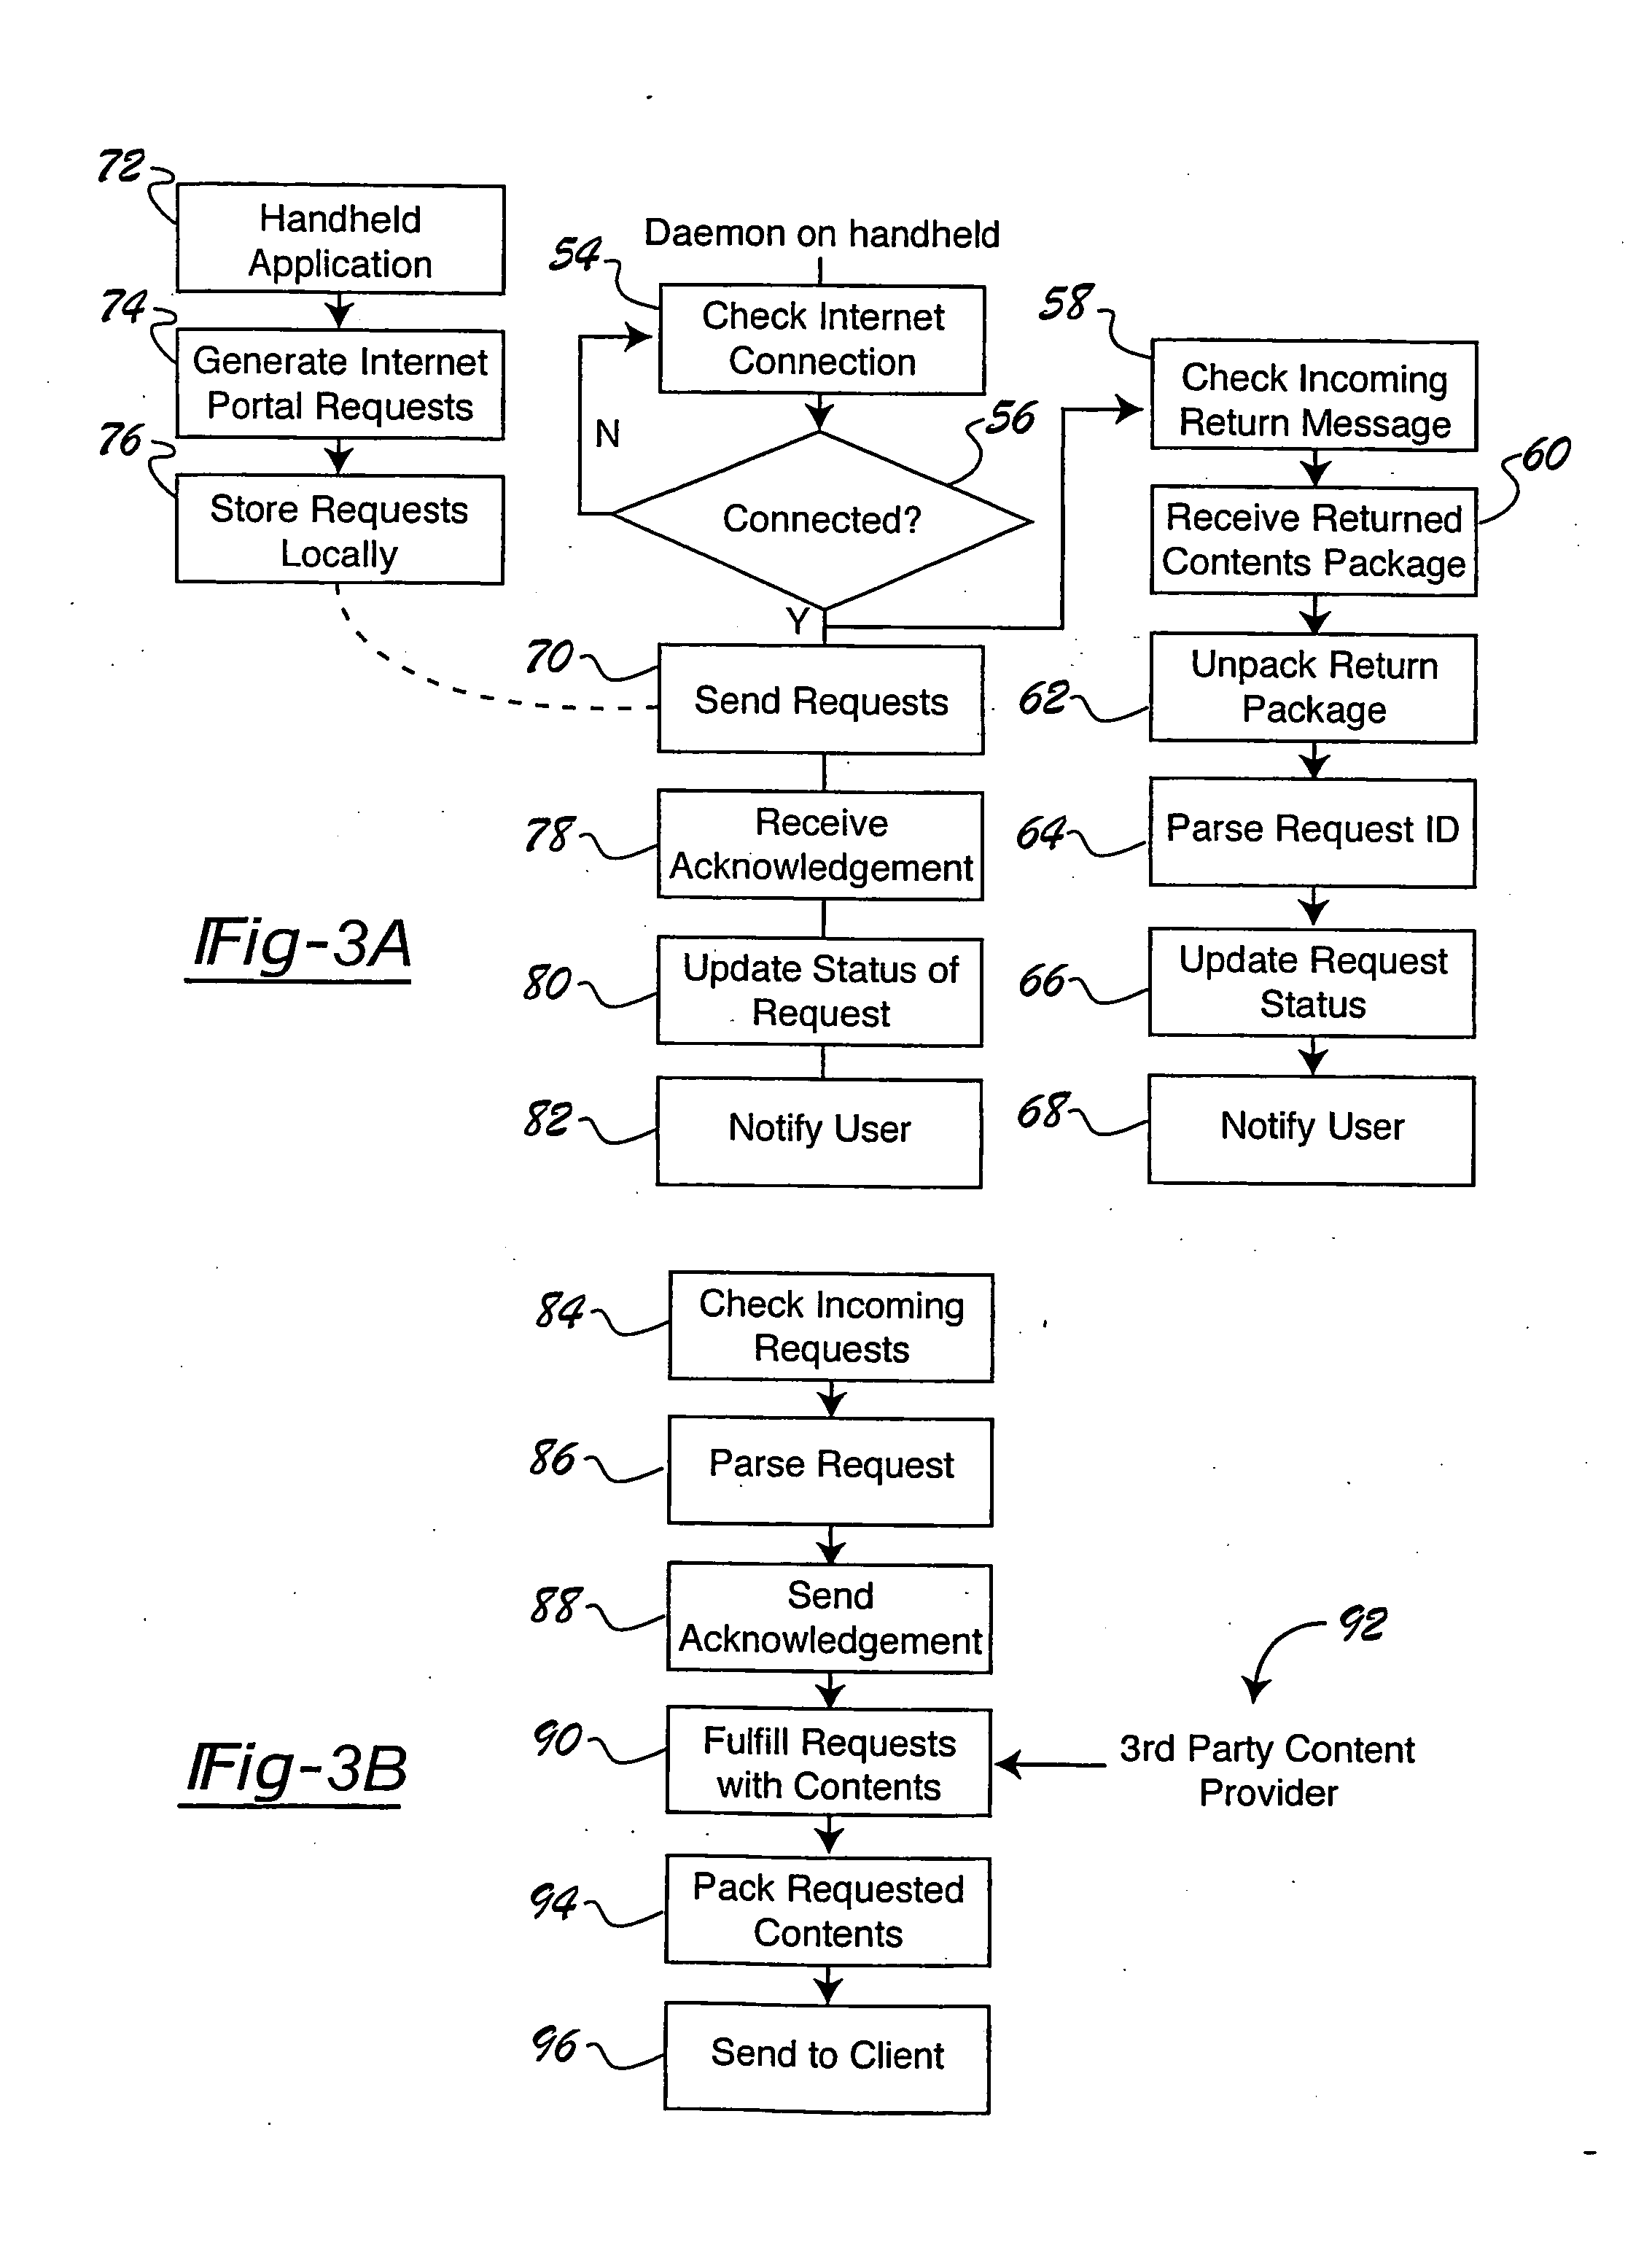 Internet portal system and method employing handheld device that connects to broadcast source